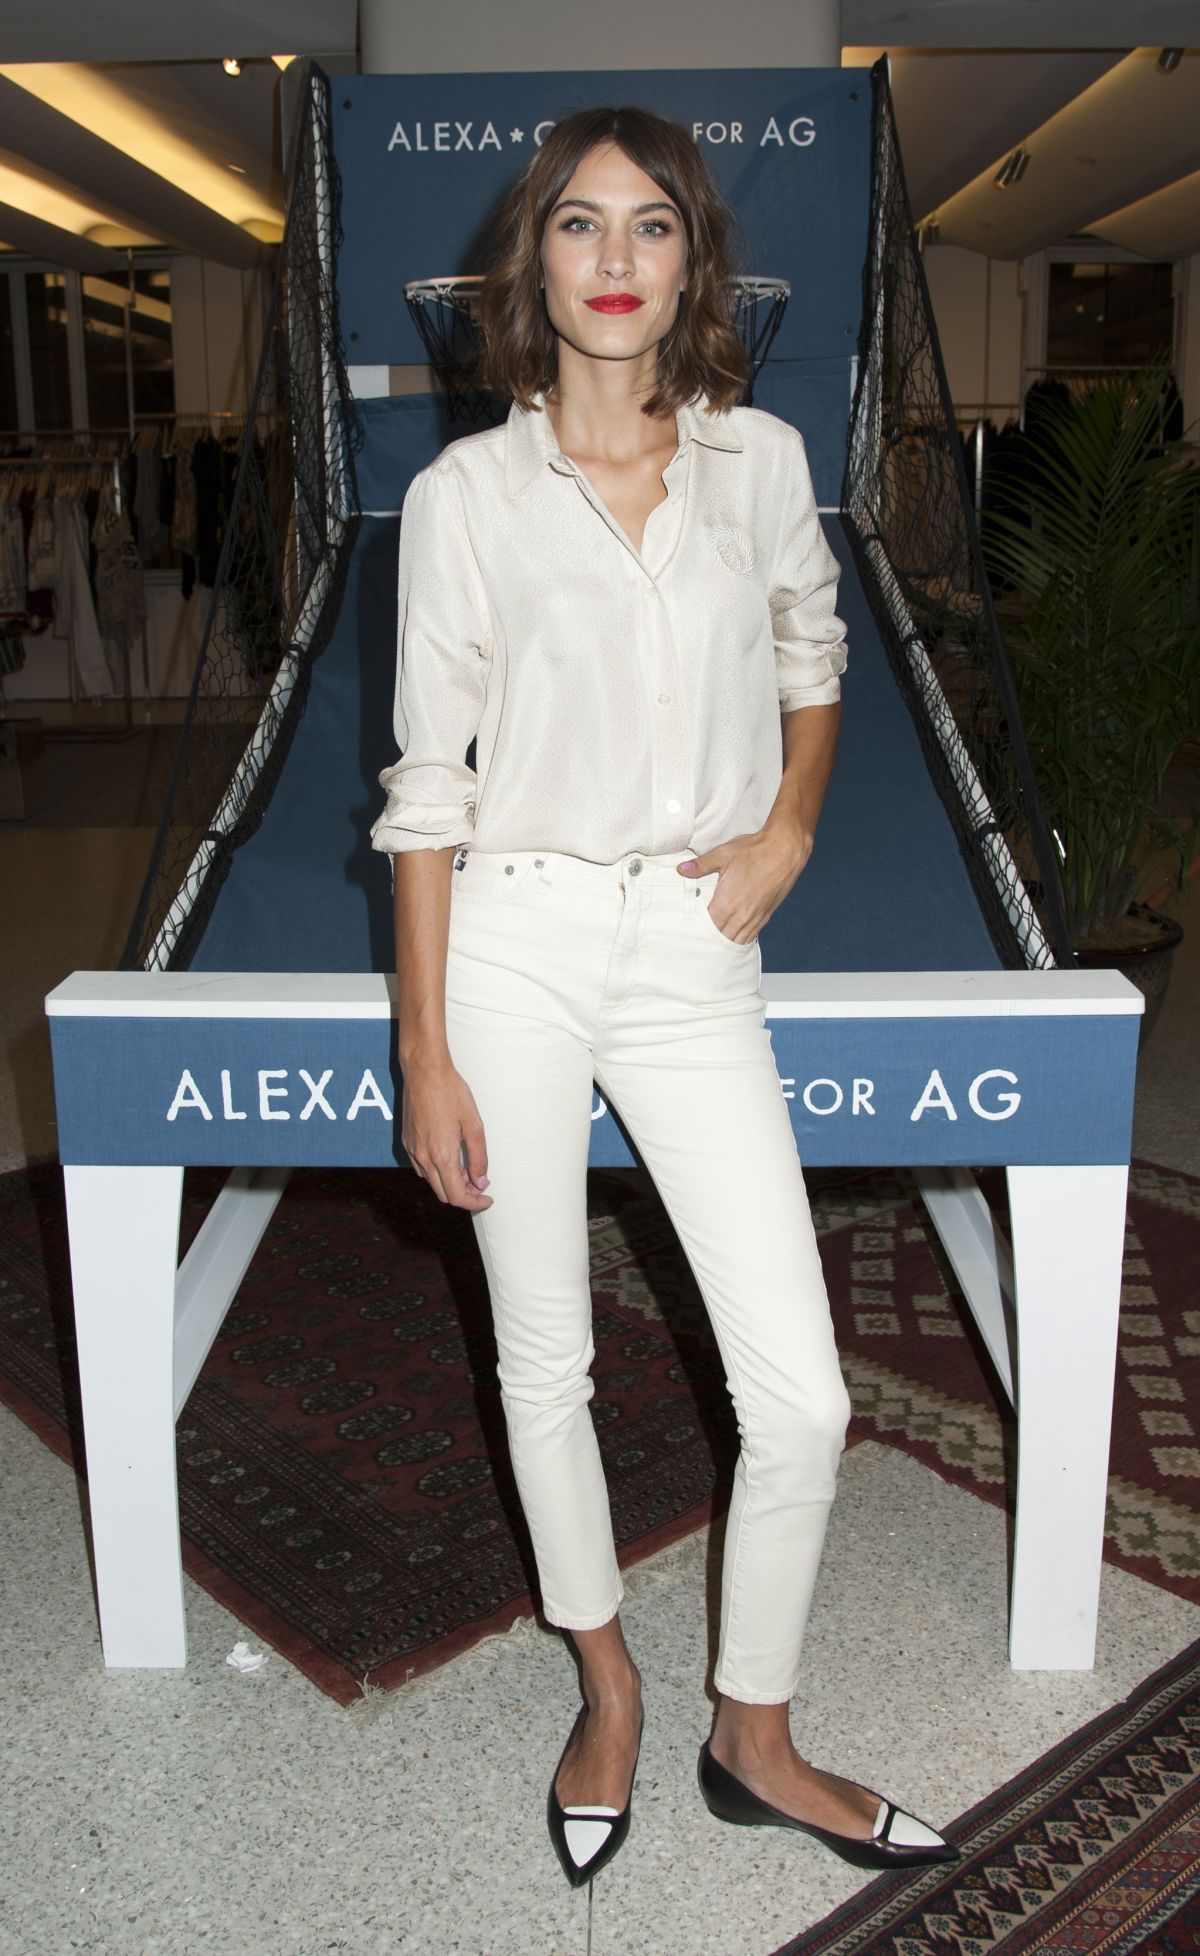 ALEXA CHUNG at AG Launch Party in New York – HawtCelebs